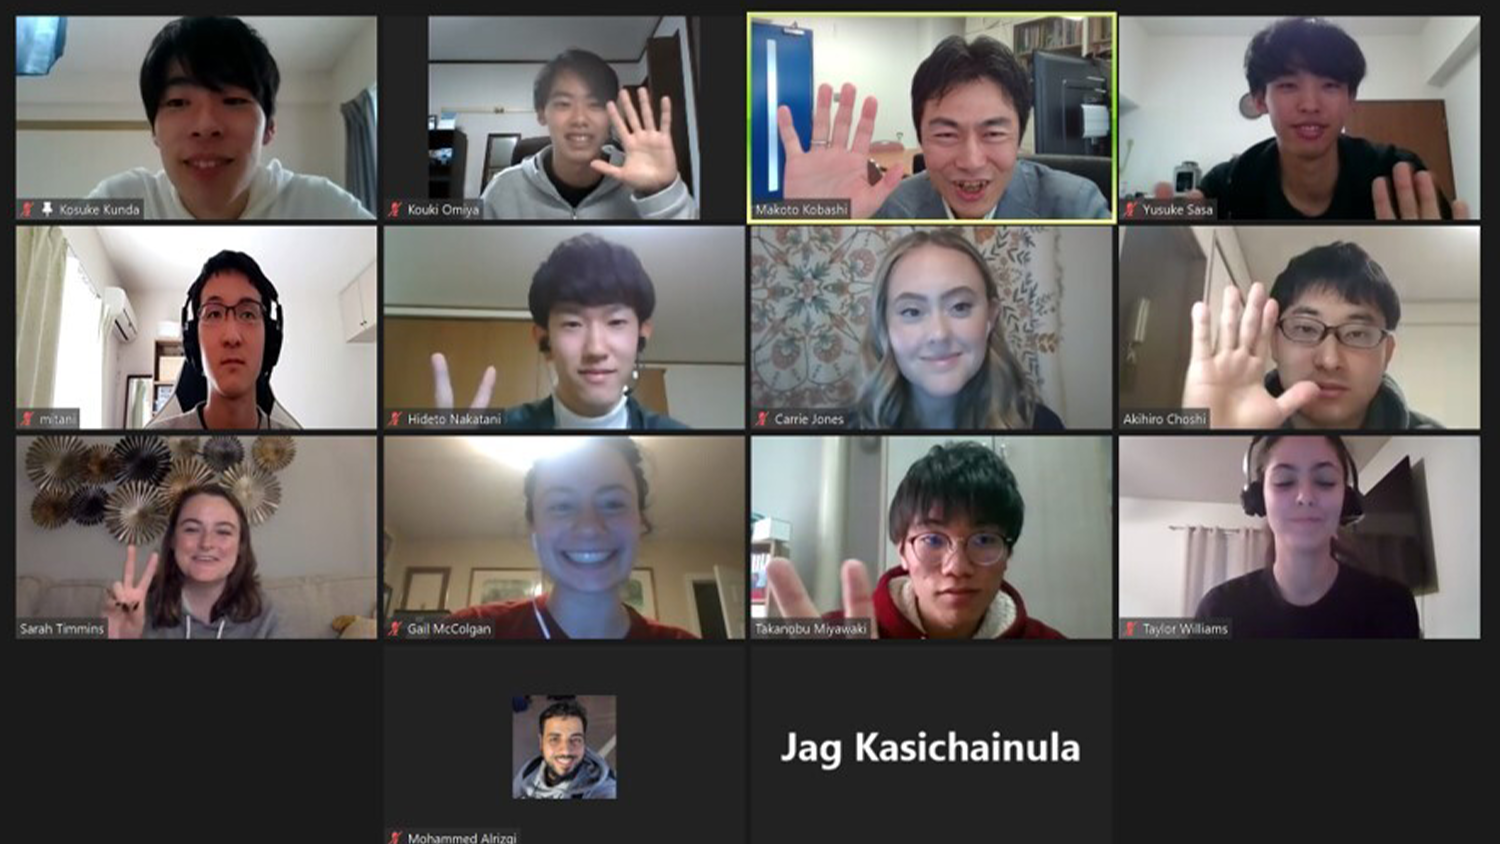 A group of students from Nagoya University and NC State University are zoom during a Zoom meeting (screenshot). 